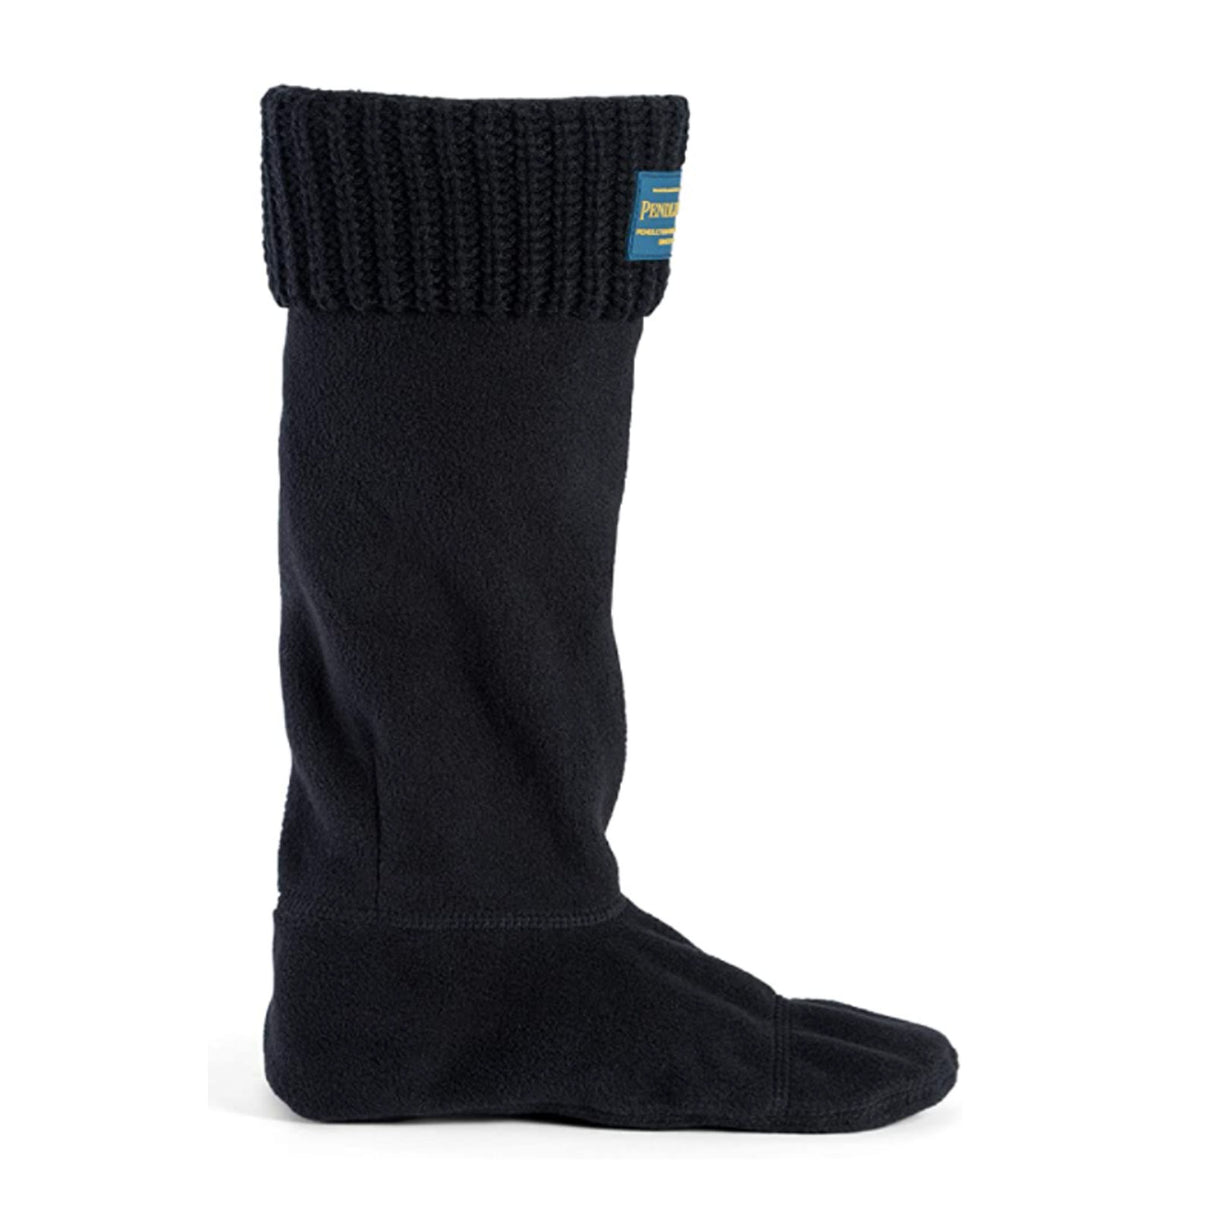 Pendleton Shaker Stitch Thermal Boot Liner (Women) - Black Accessories - Socks - Lifestyle - The Heel Shoe Fitters